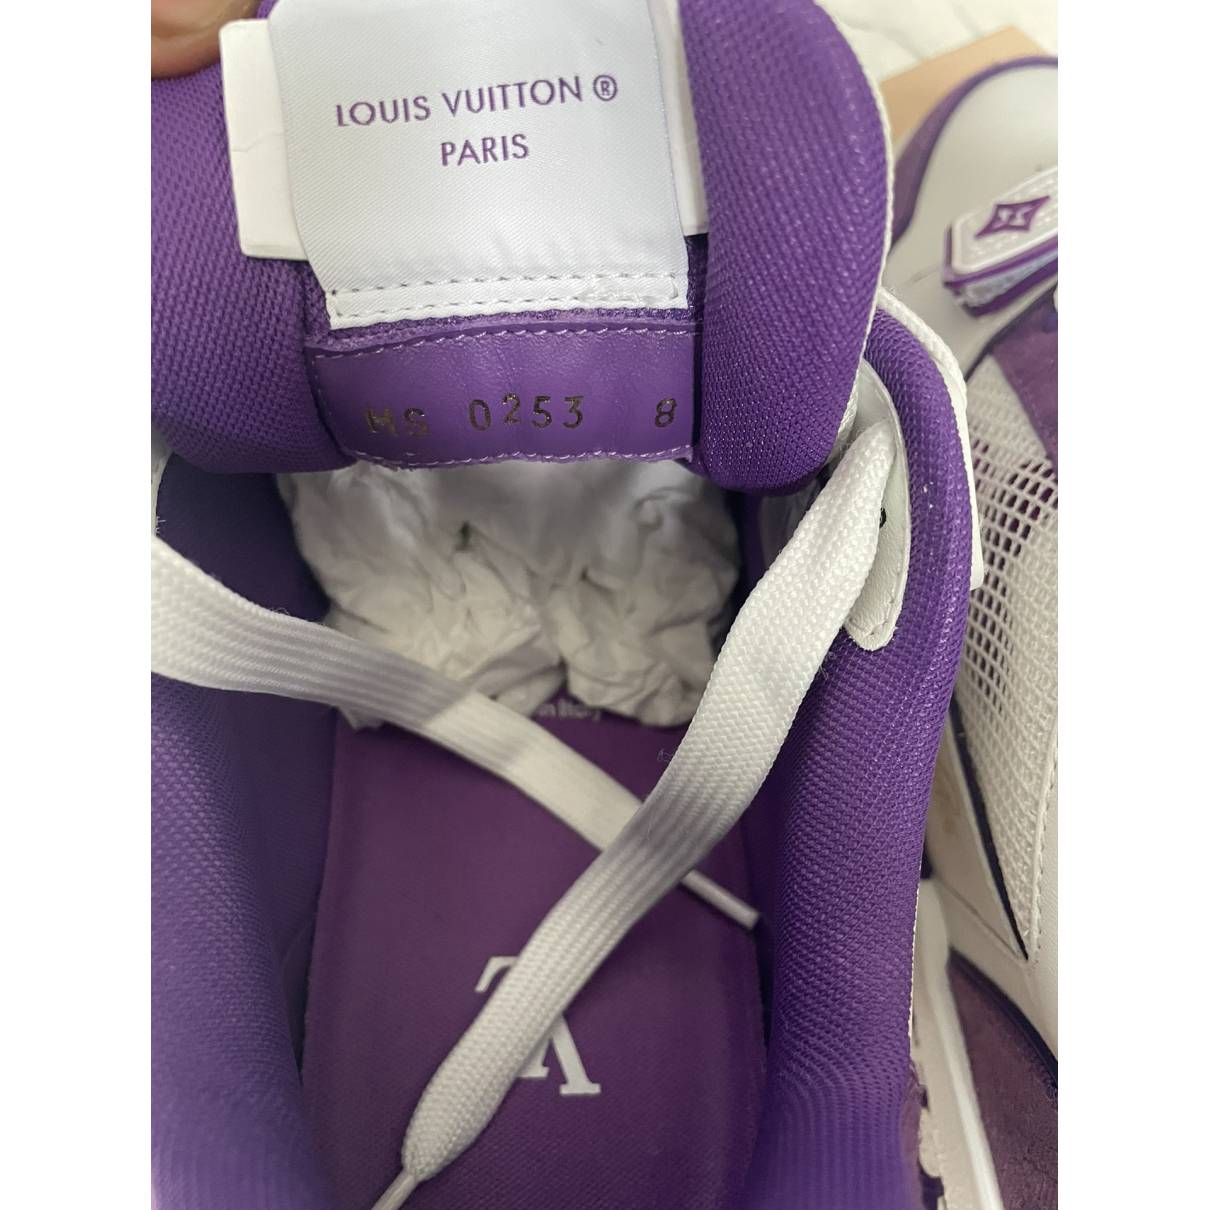 Lv trainer leather low trainers Louis Vuitton Purple size 6 UK in Leather -  34315494